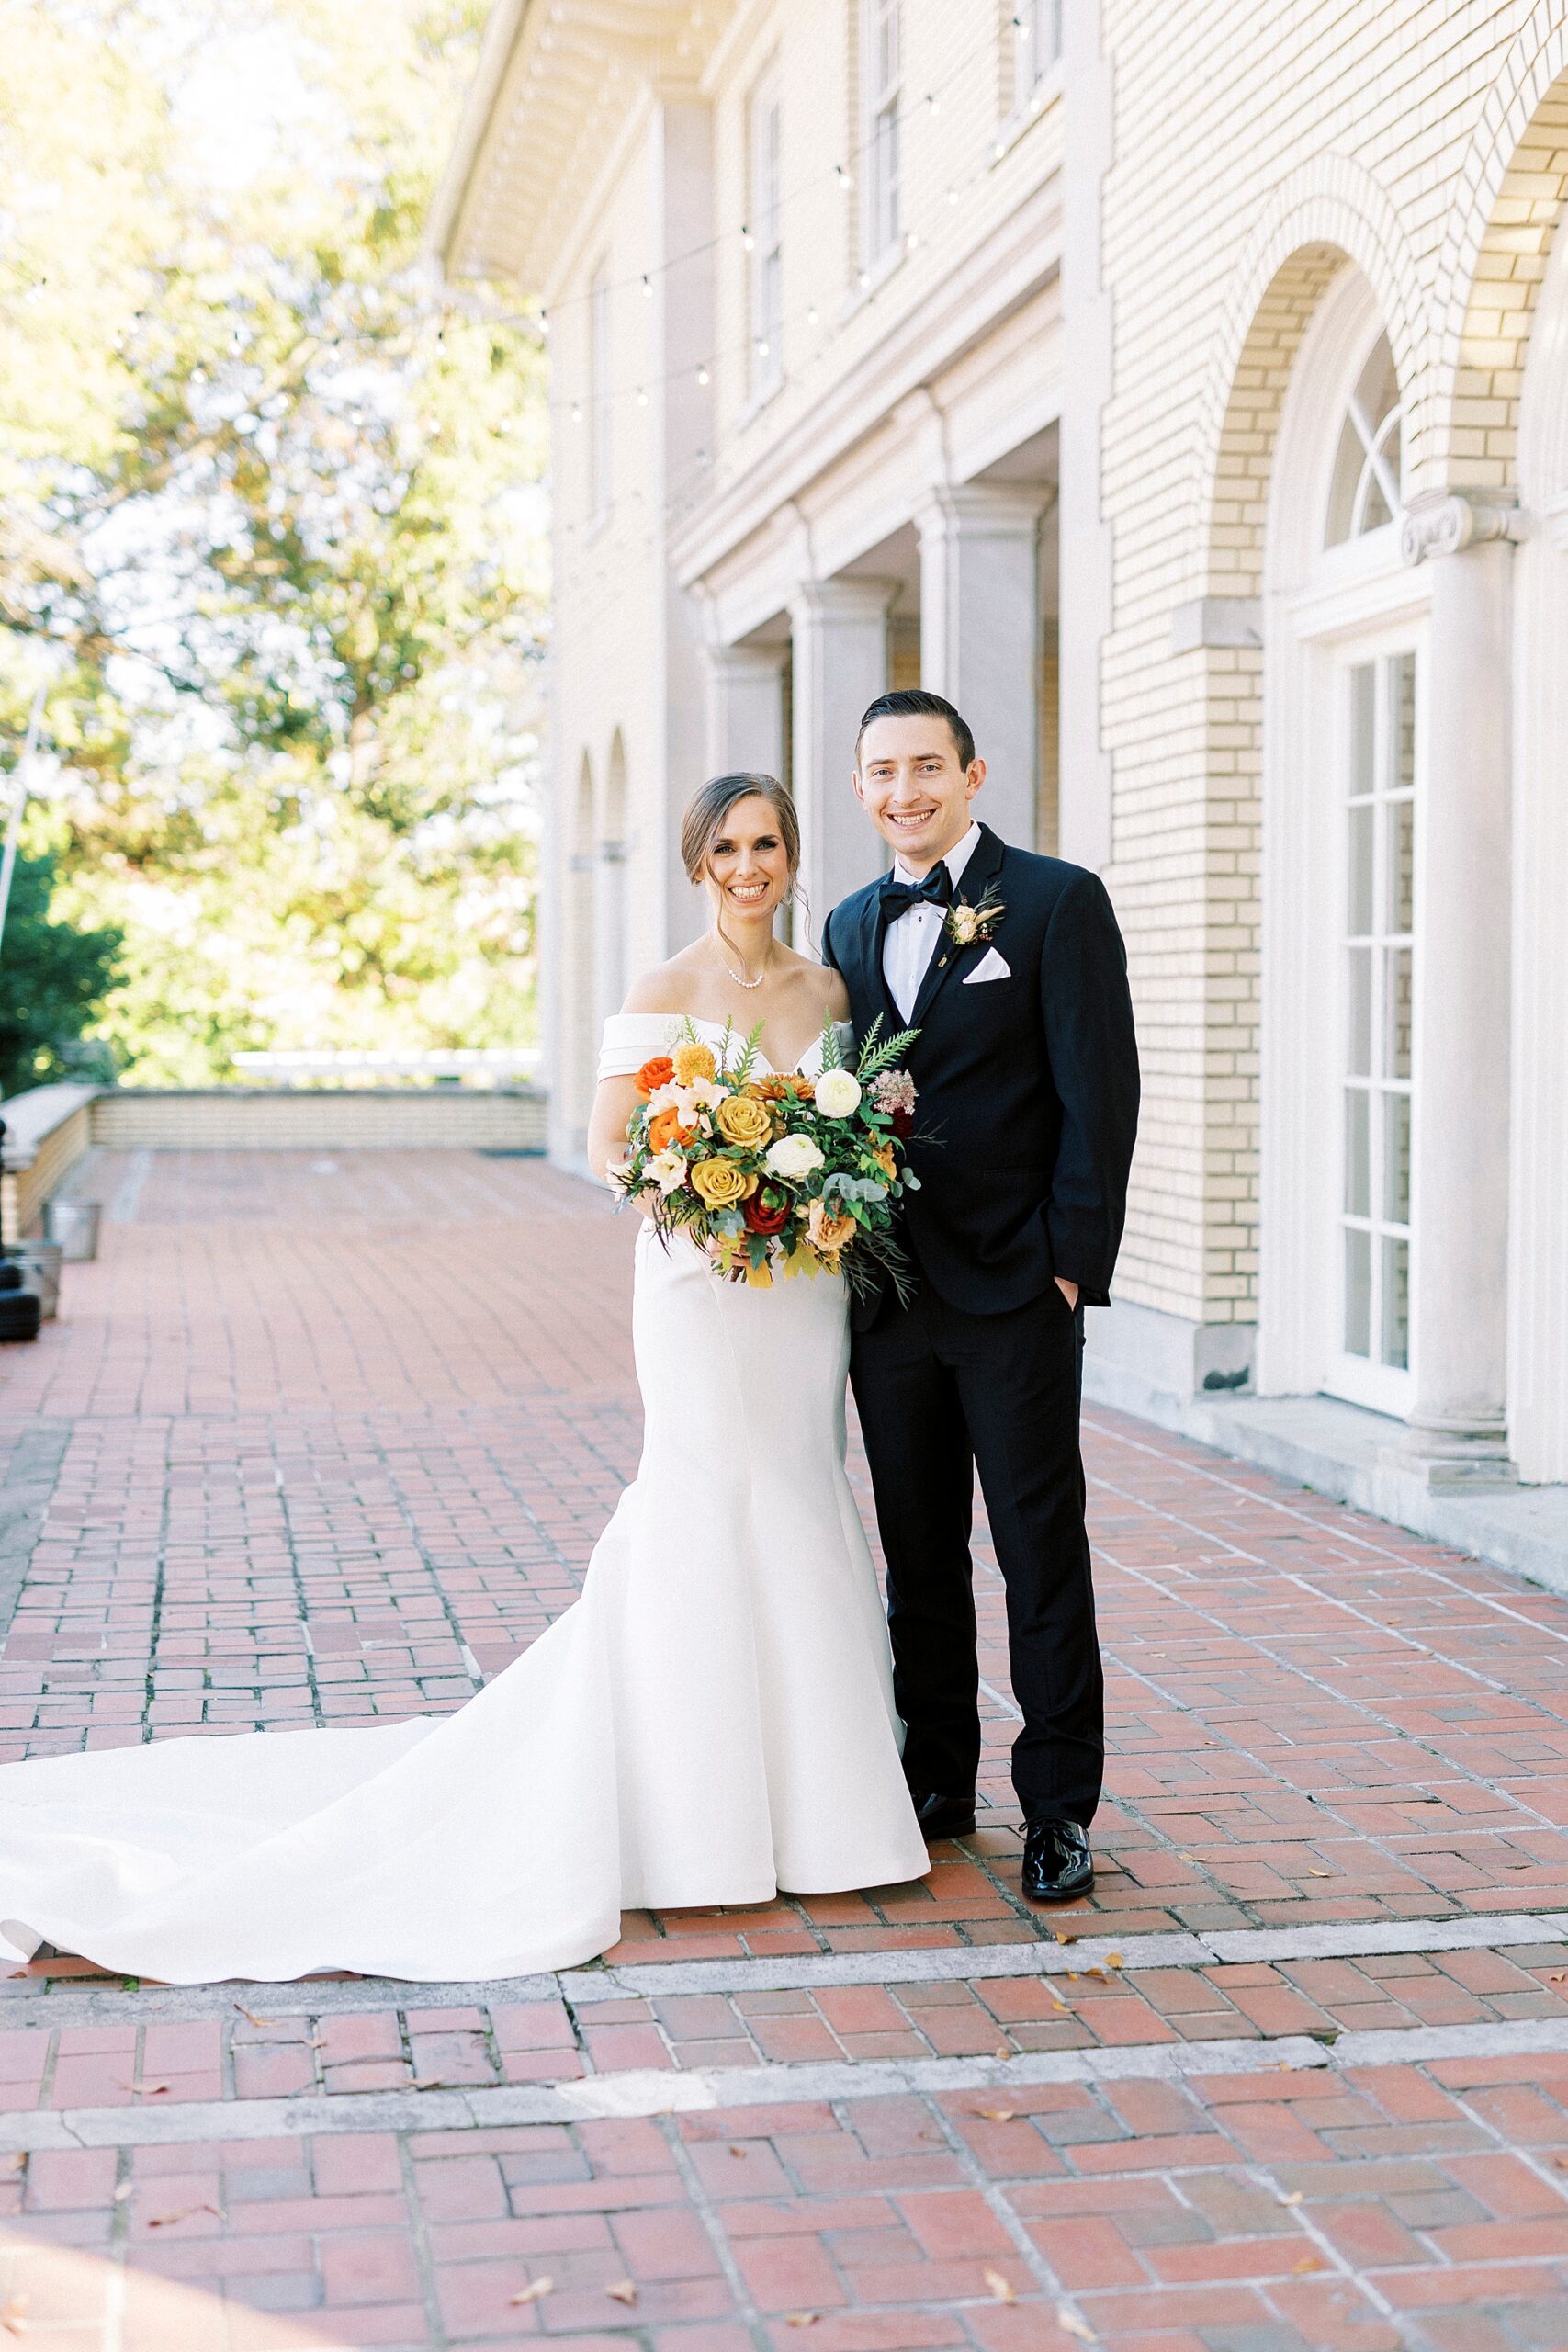 newlyweds stand together on patio during fall wedding photos at Separk Mansion